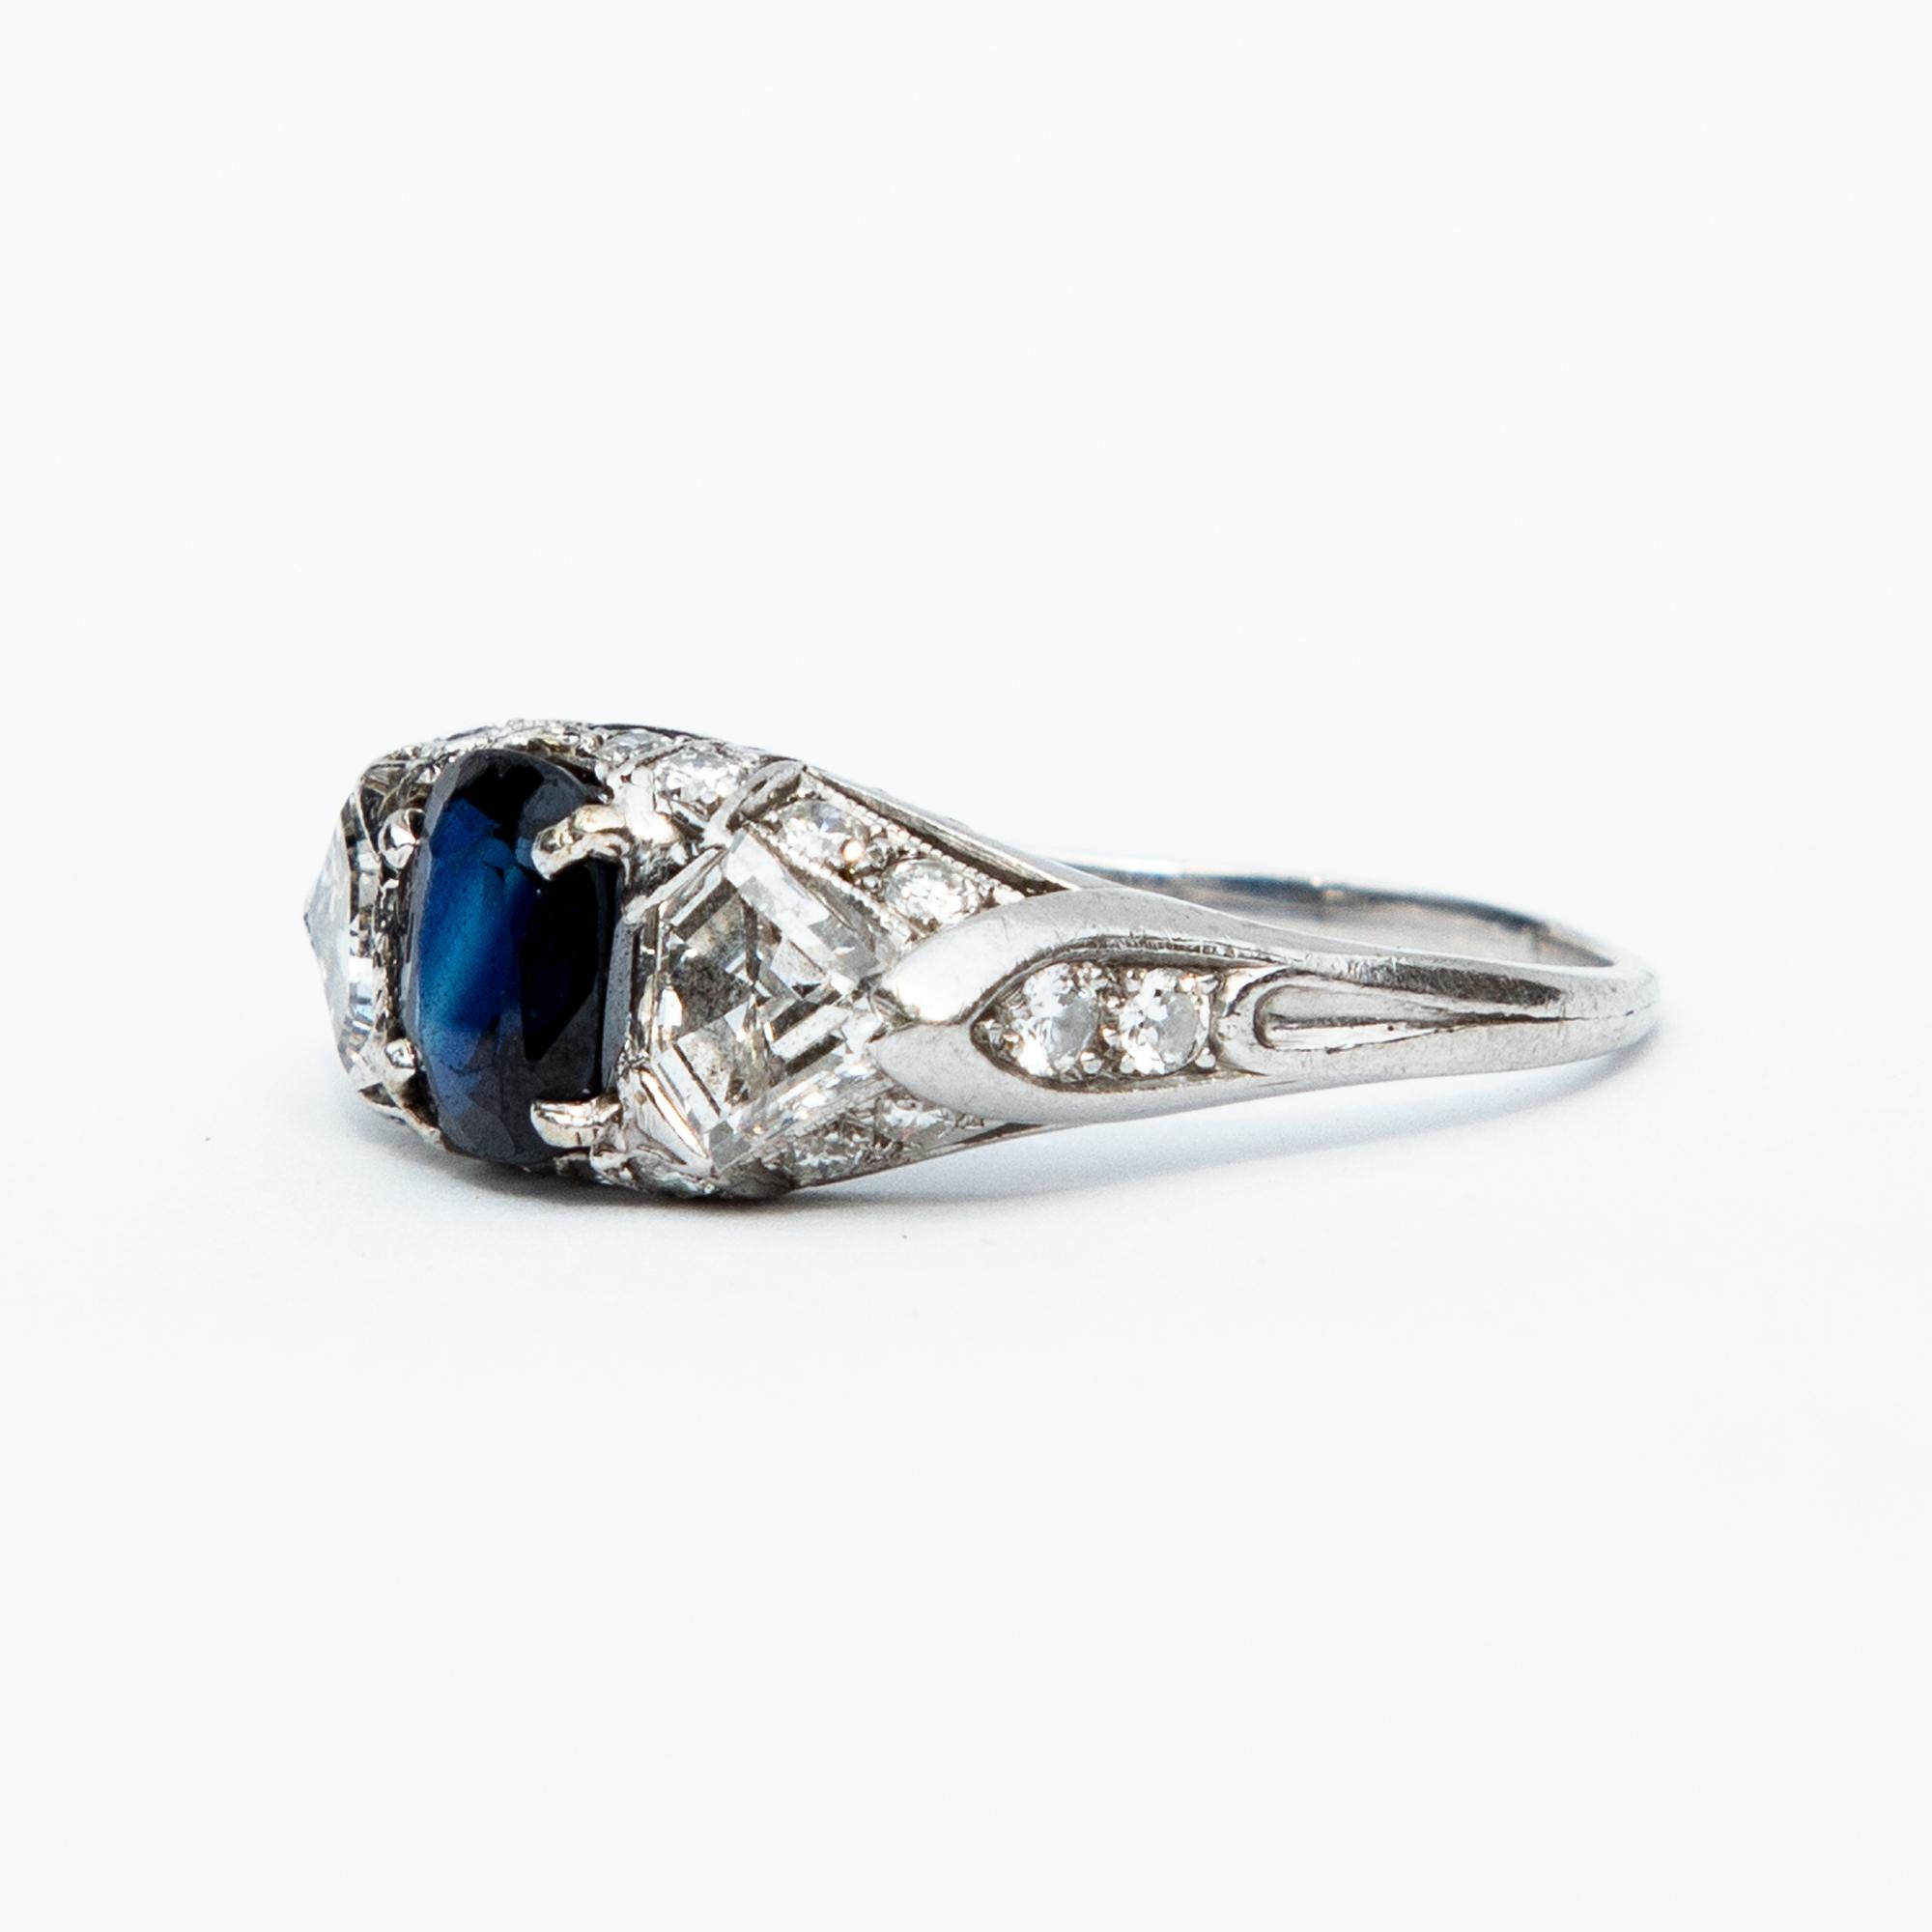 A stunning American origin, Art Deco natural sapphire and diamond three stone ring set in platinum. The wonderful certified 1.3 carat point natural sapphire is flanked by two triangular tapered diamonds and beautifully mounted with a gallery of